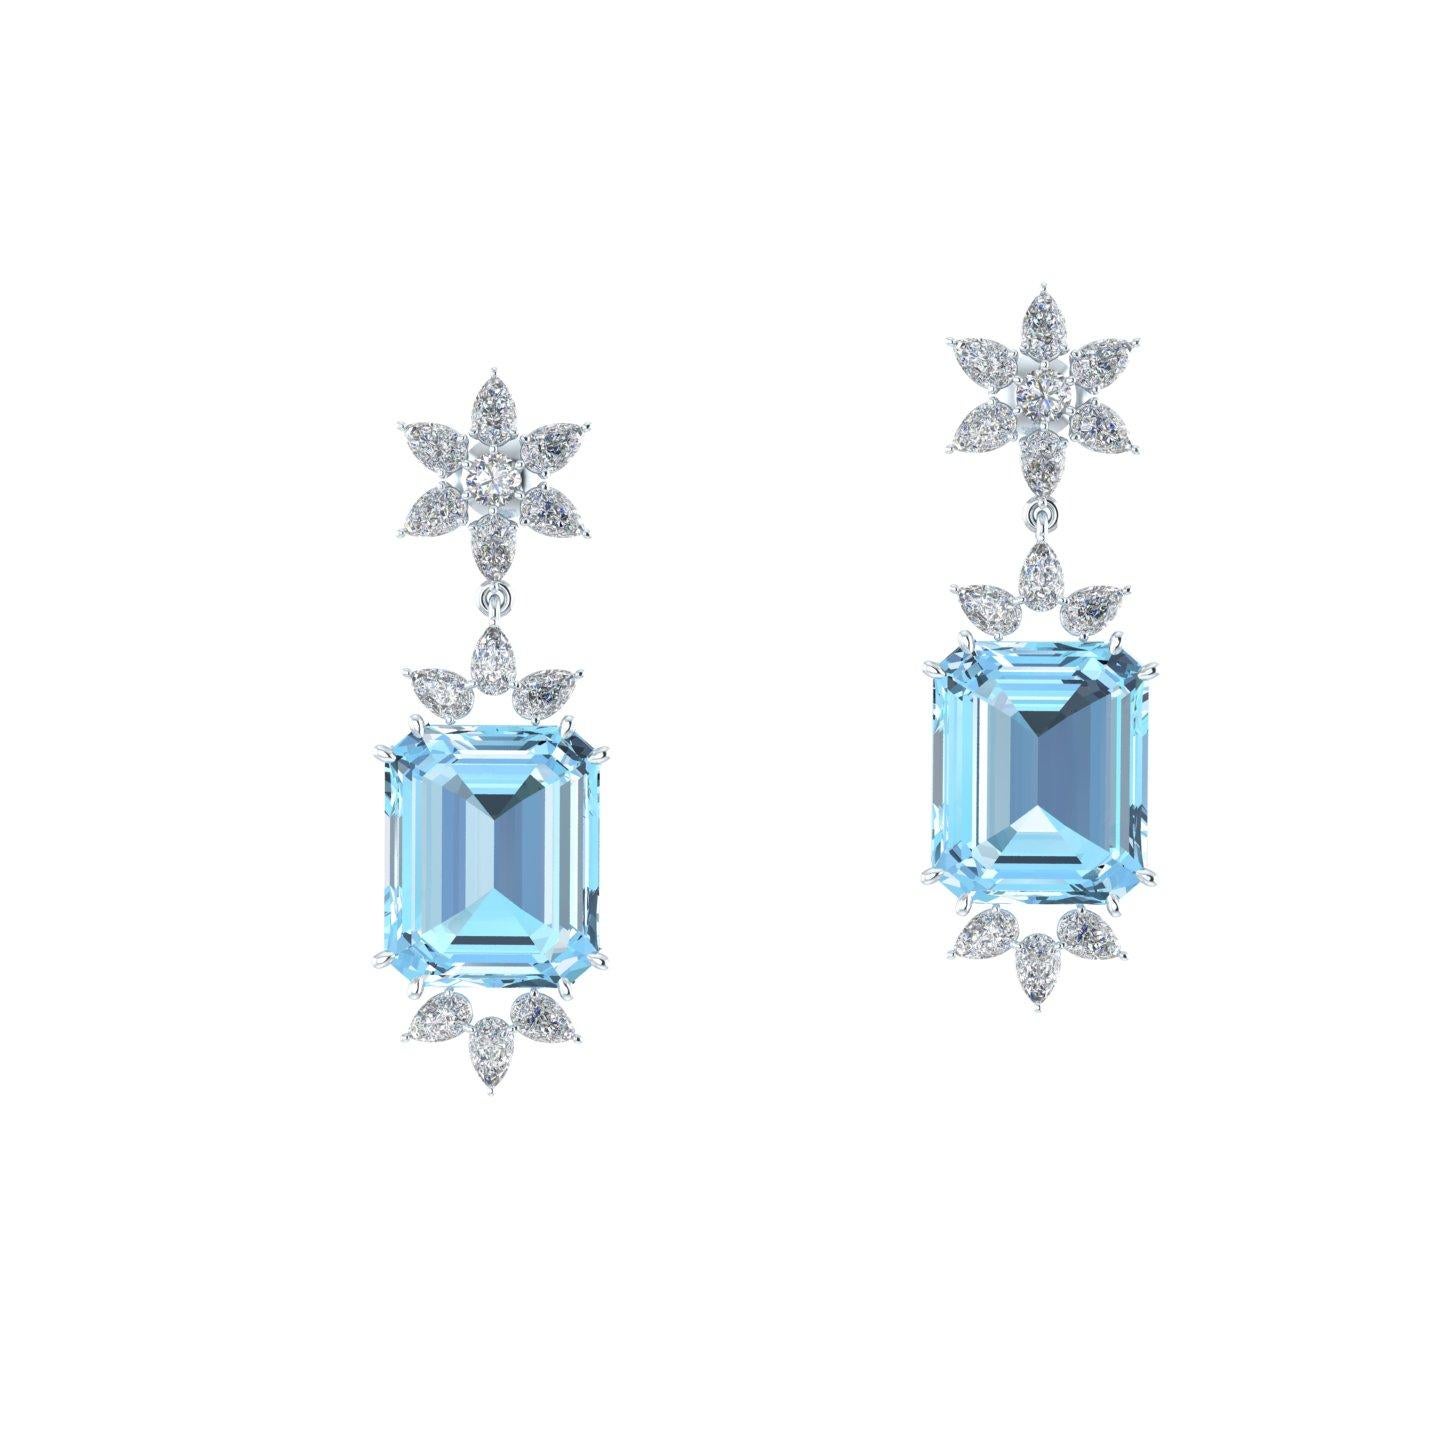 19.5 Carats Emerald cut Aquamarine and Pear Cut Diamonds in 18k white gold Earrings, diamonds F/G color, VS clarity bright white, for an approximate total carat weight of 3 carats, dangling earrings
Push back self locking.   Complimentary Screw back